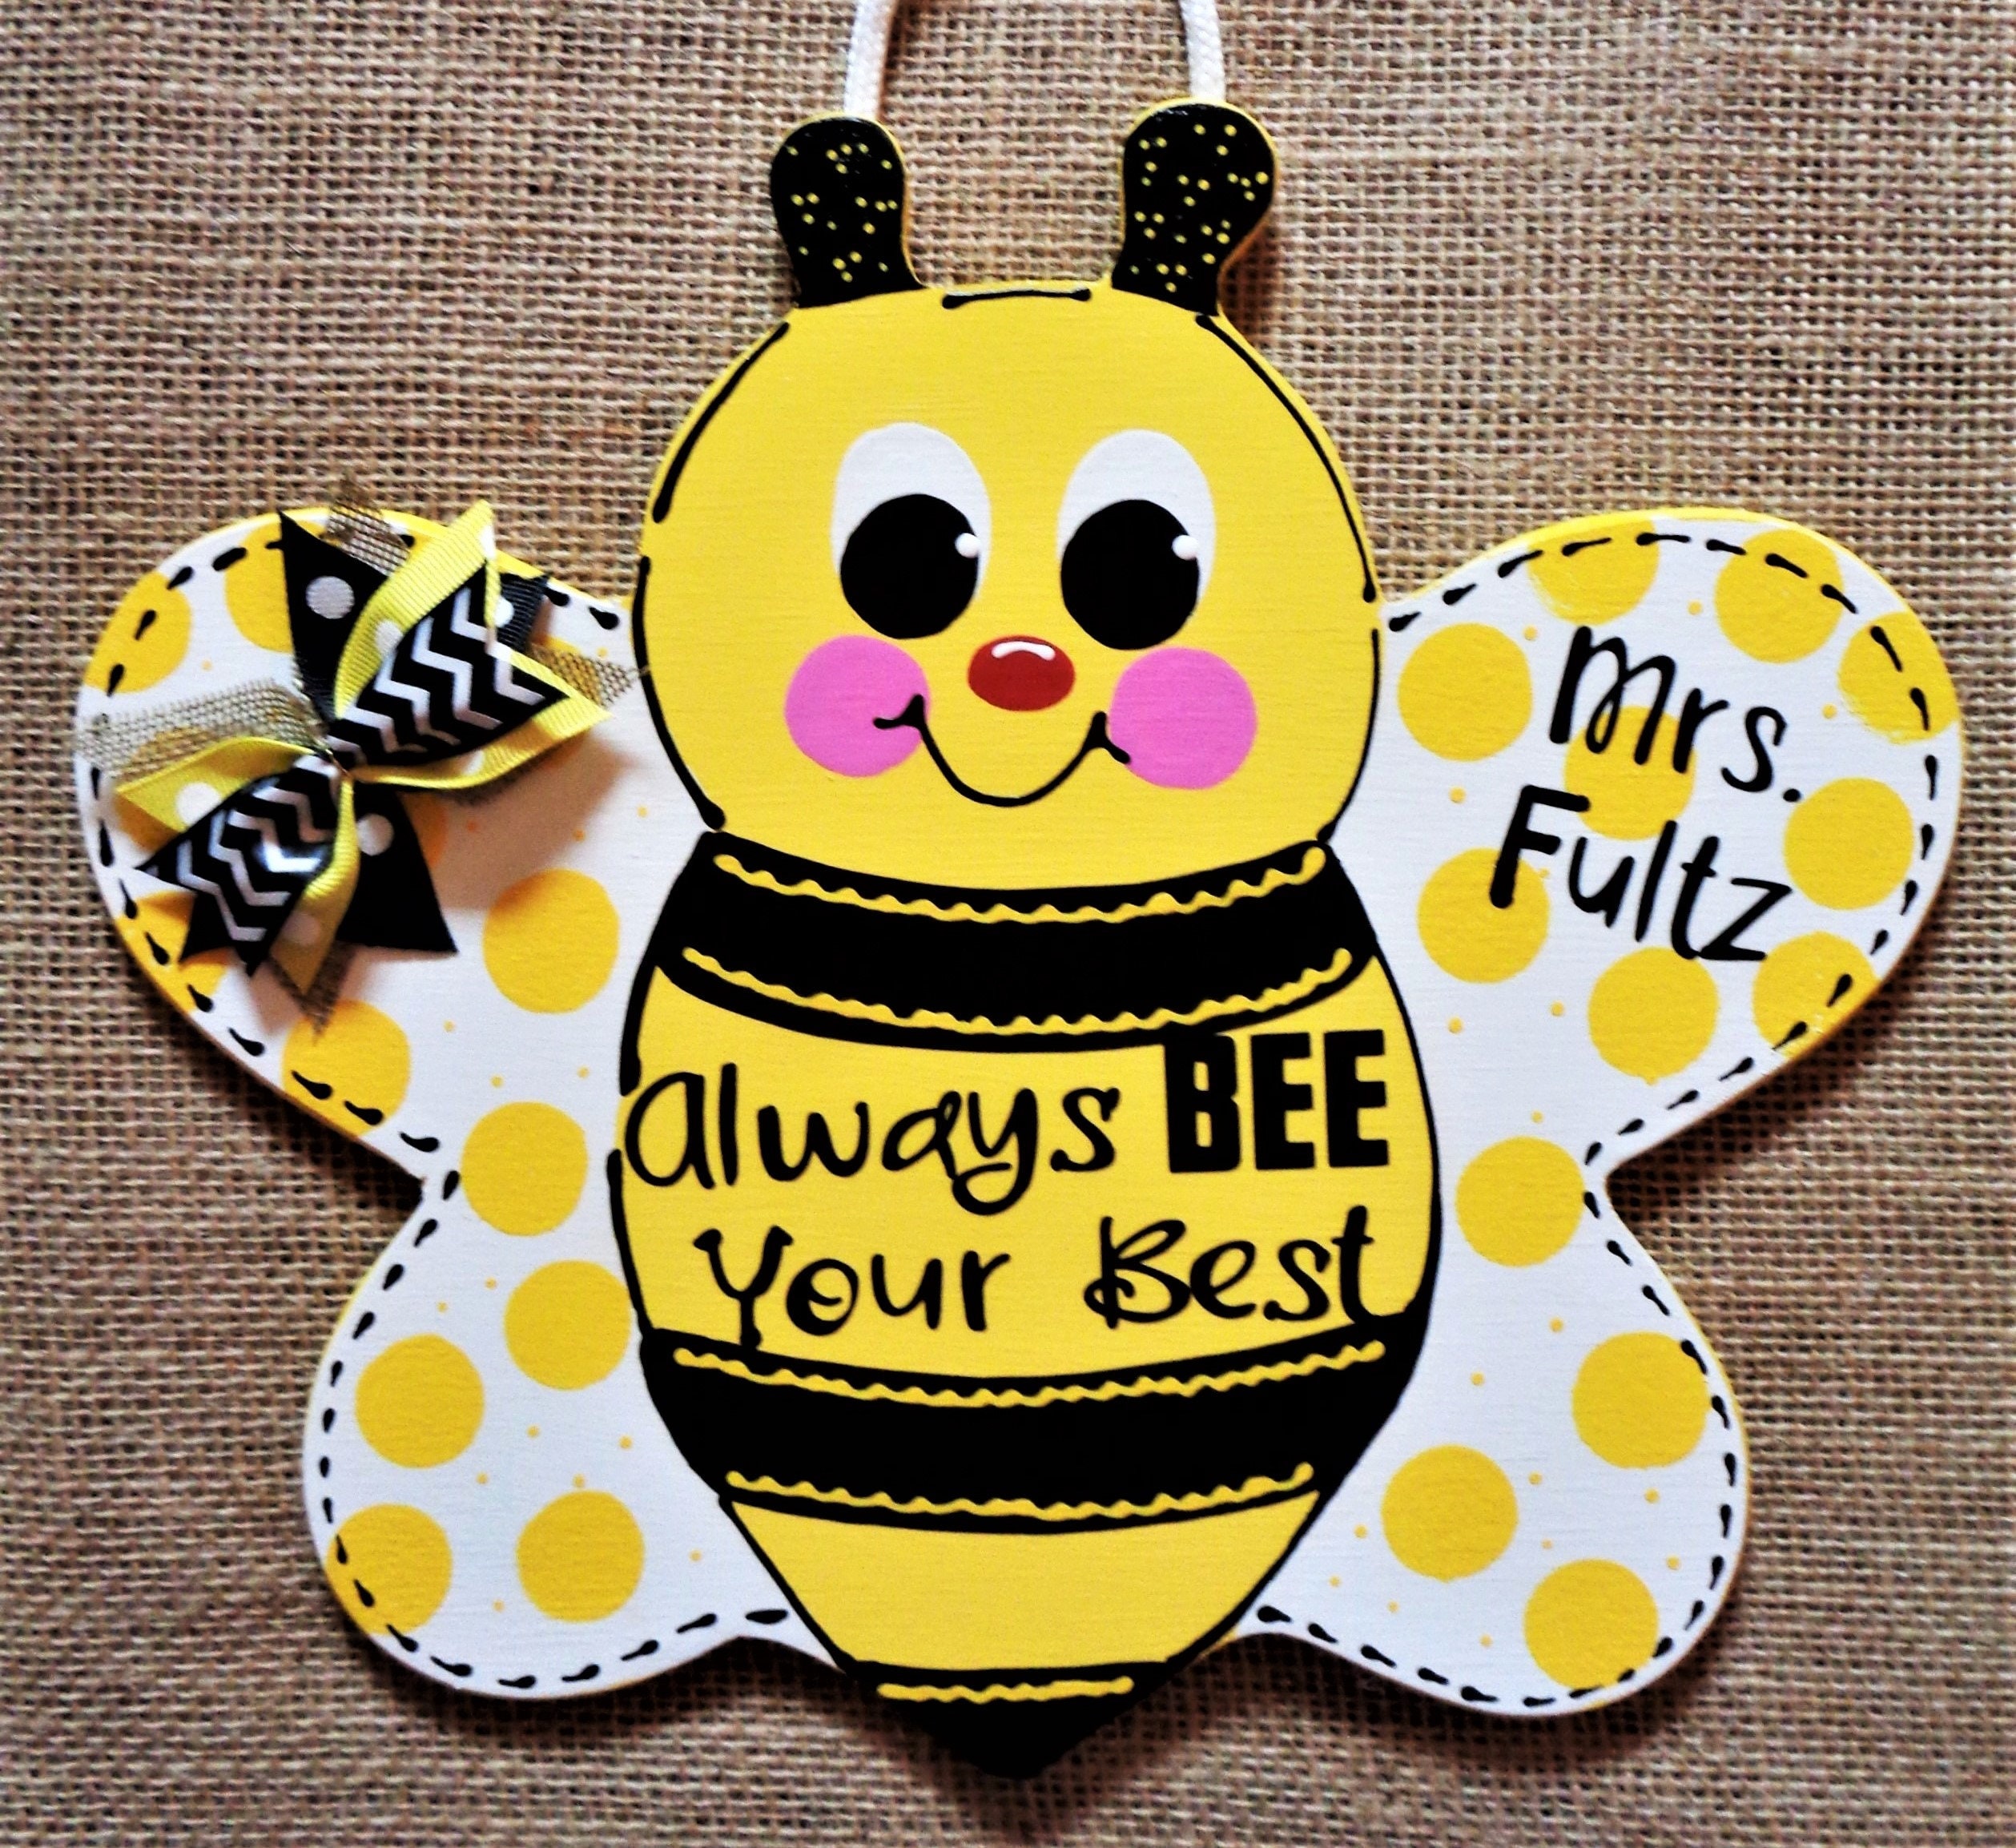 Lets Get Ready To Bumble Bee Funny Insect Wall Art Bumble Bee